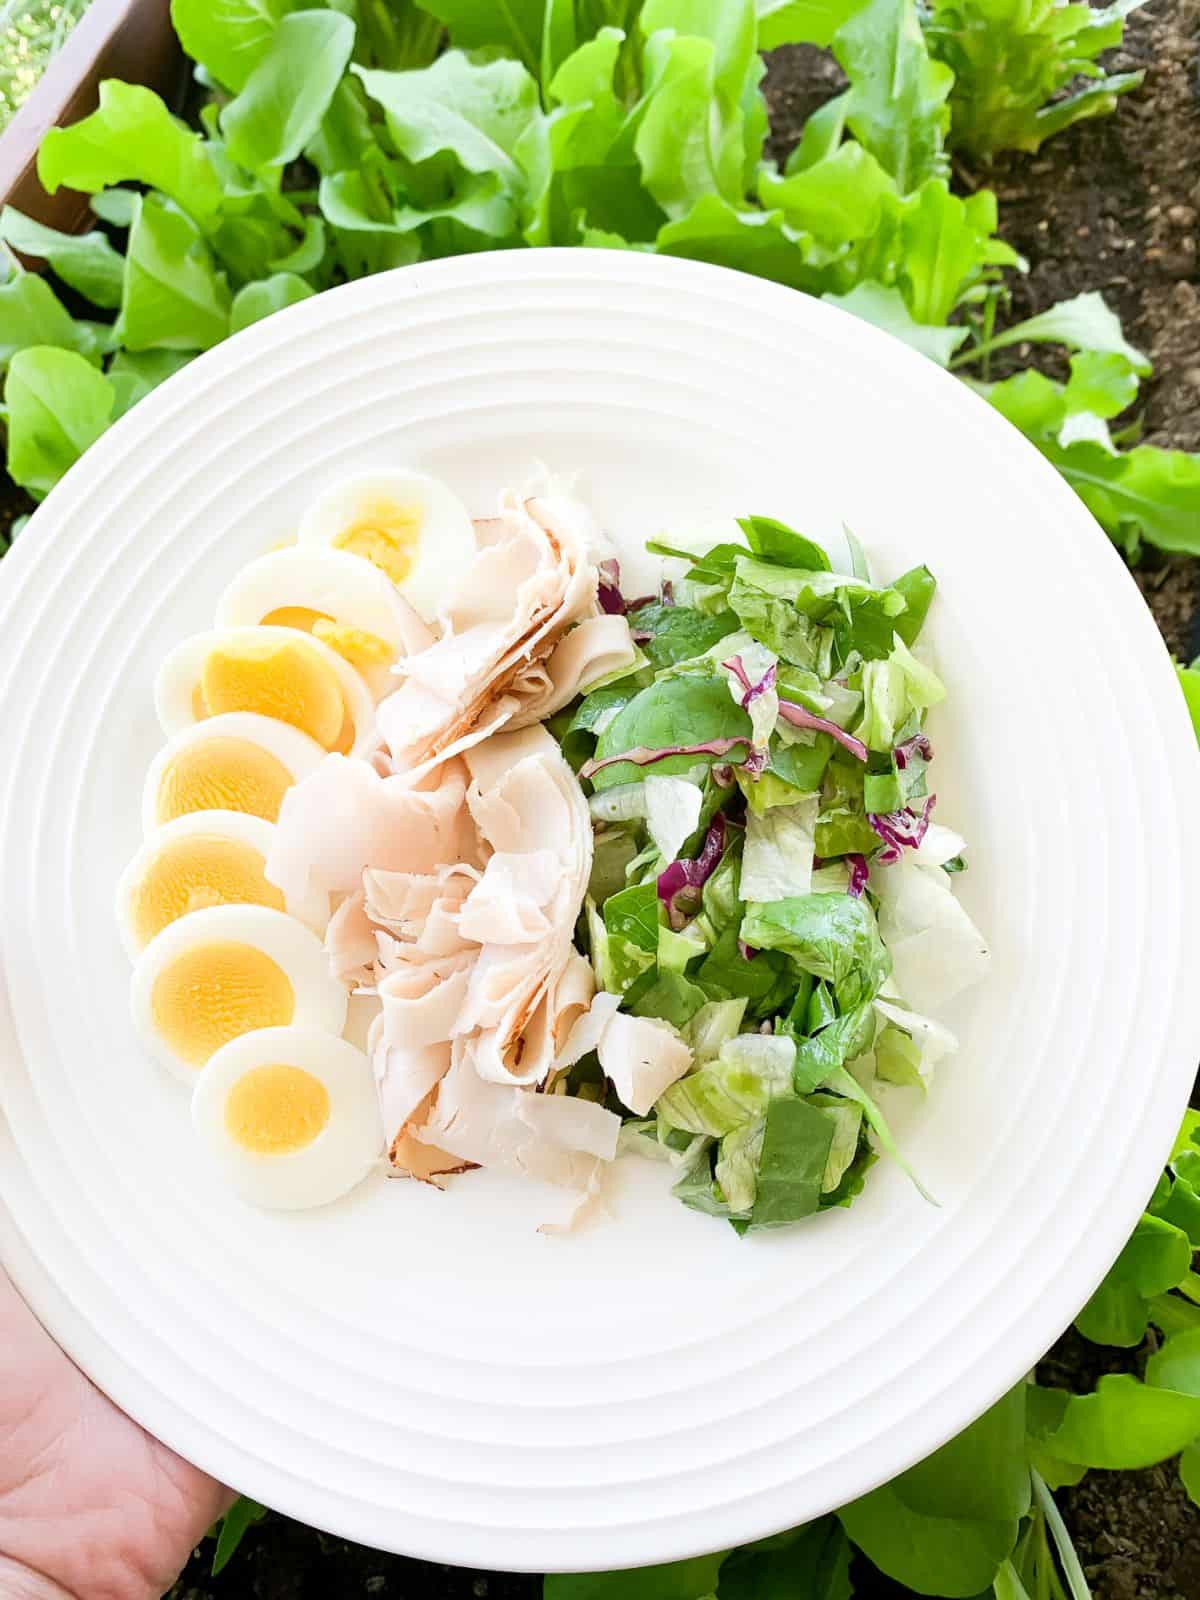 fresh lettuce on plate with hard boiled eggs and sliced turkey.